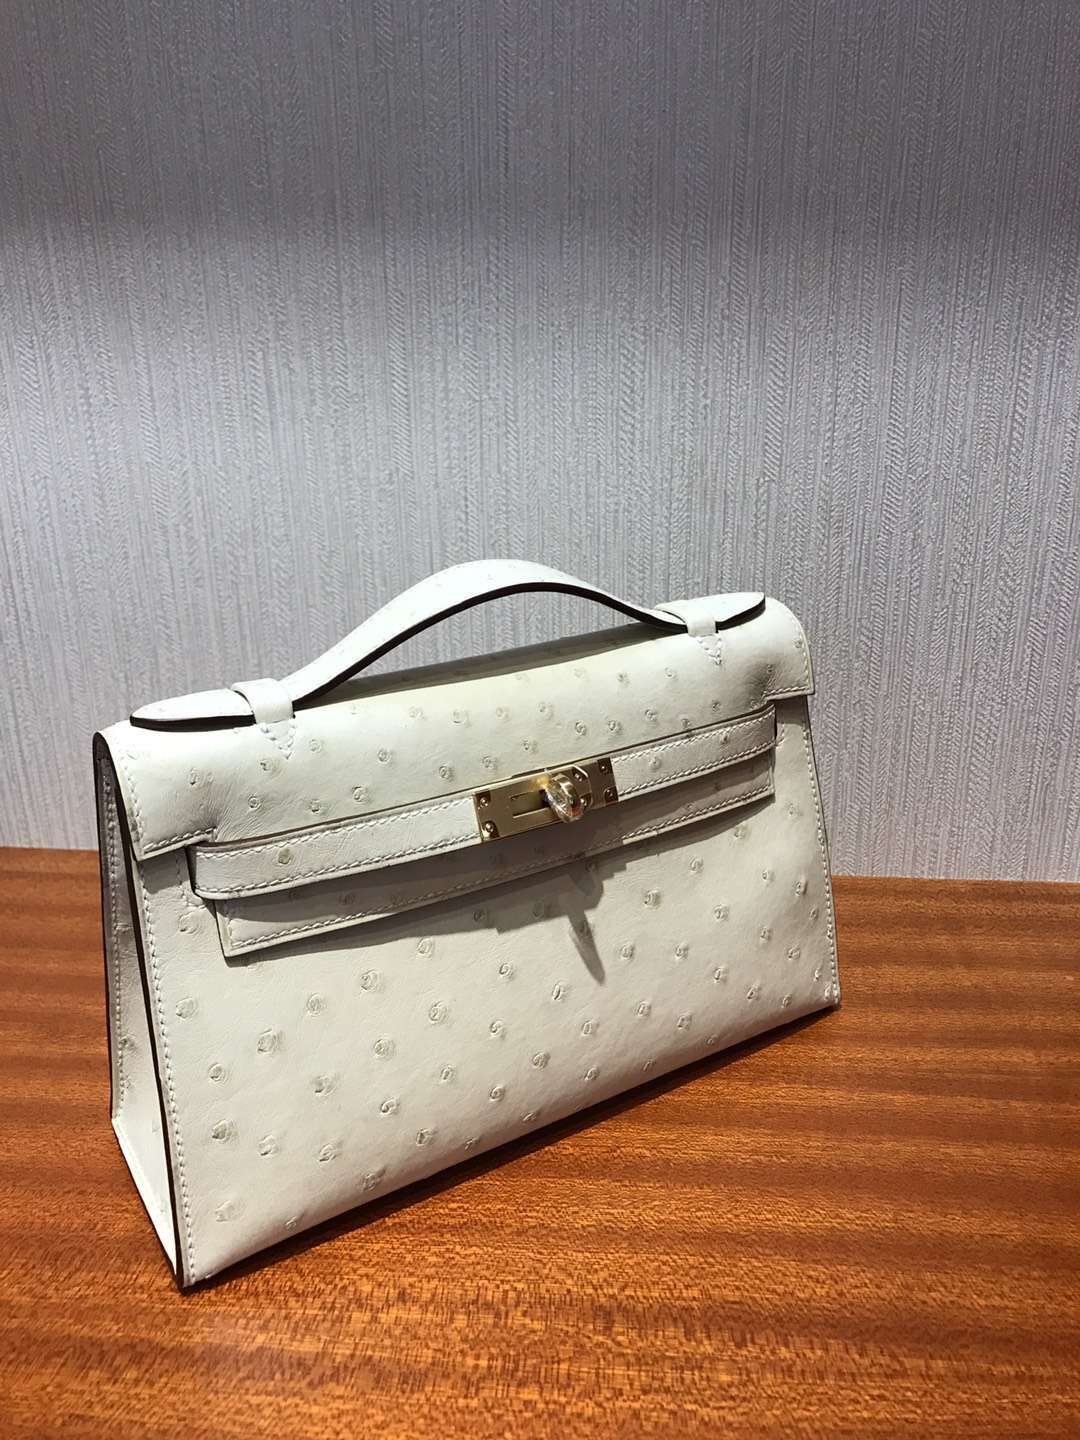 Discount Hermes 3C Wool White Ostrich Leather Minikelly Clutch Bag22CM